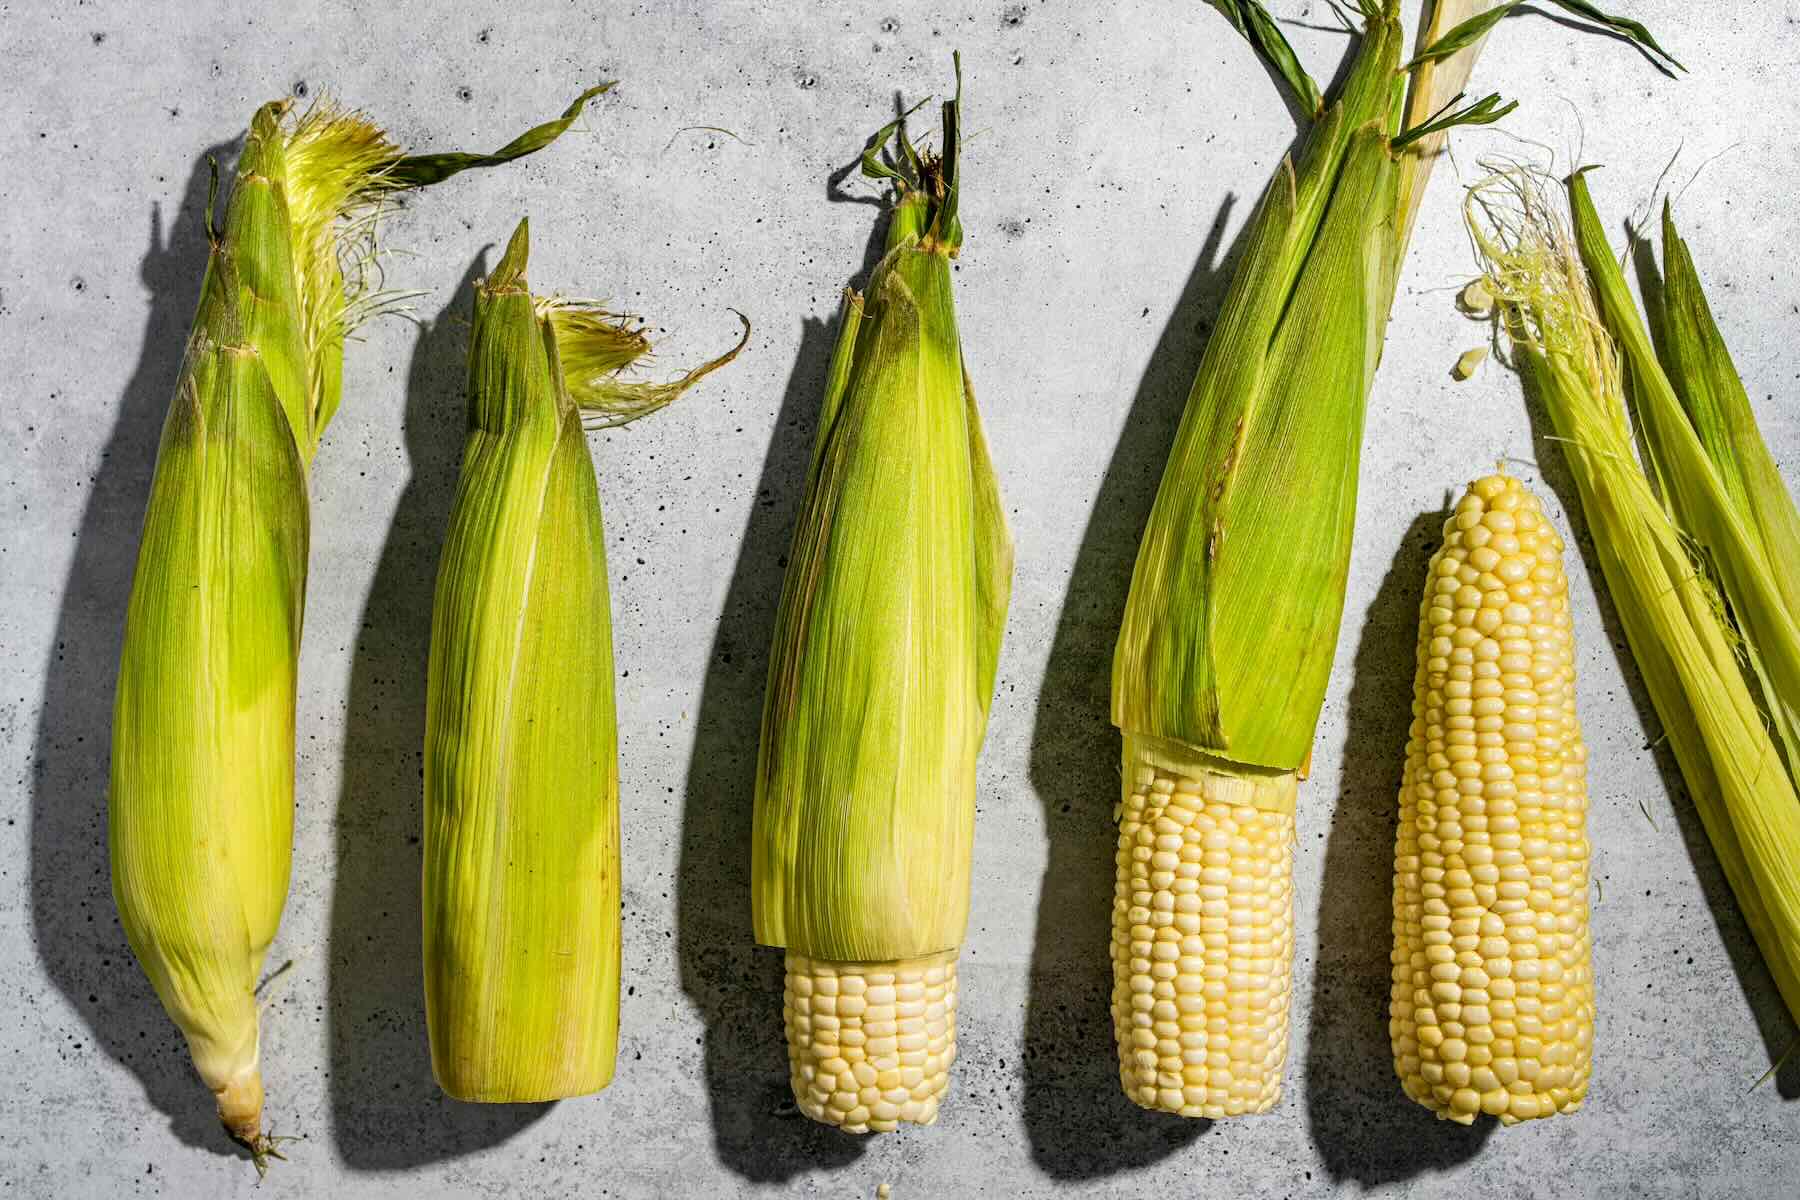 How To Store Shucked Corn